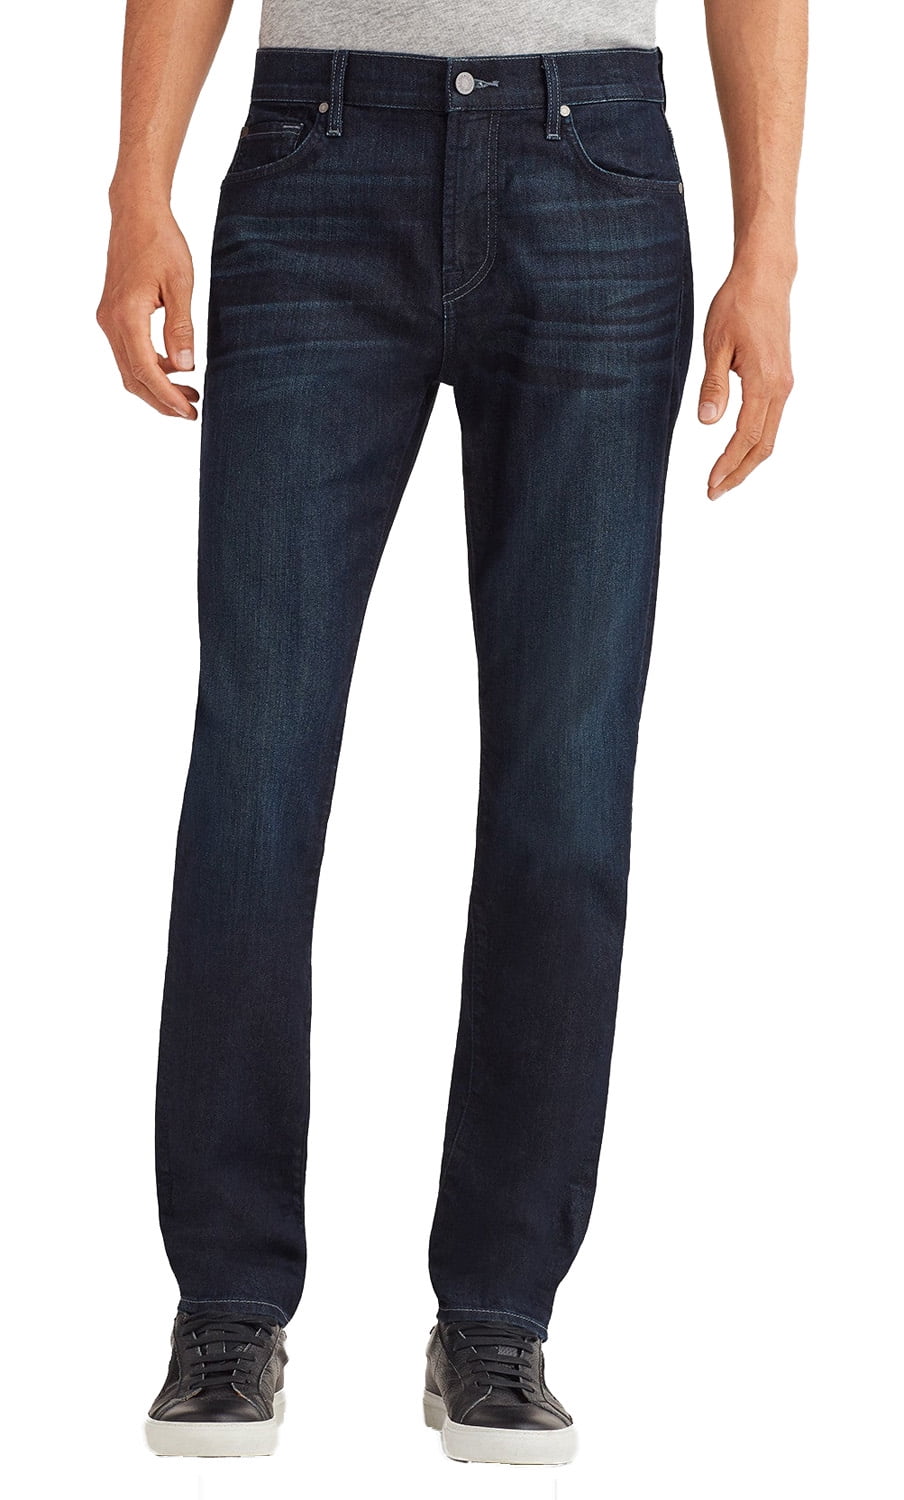 7 for all mankind mens jeans sale